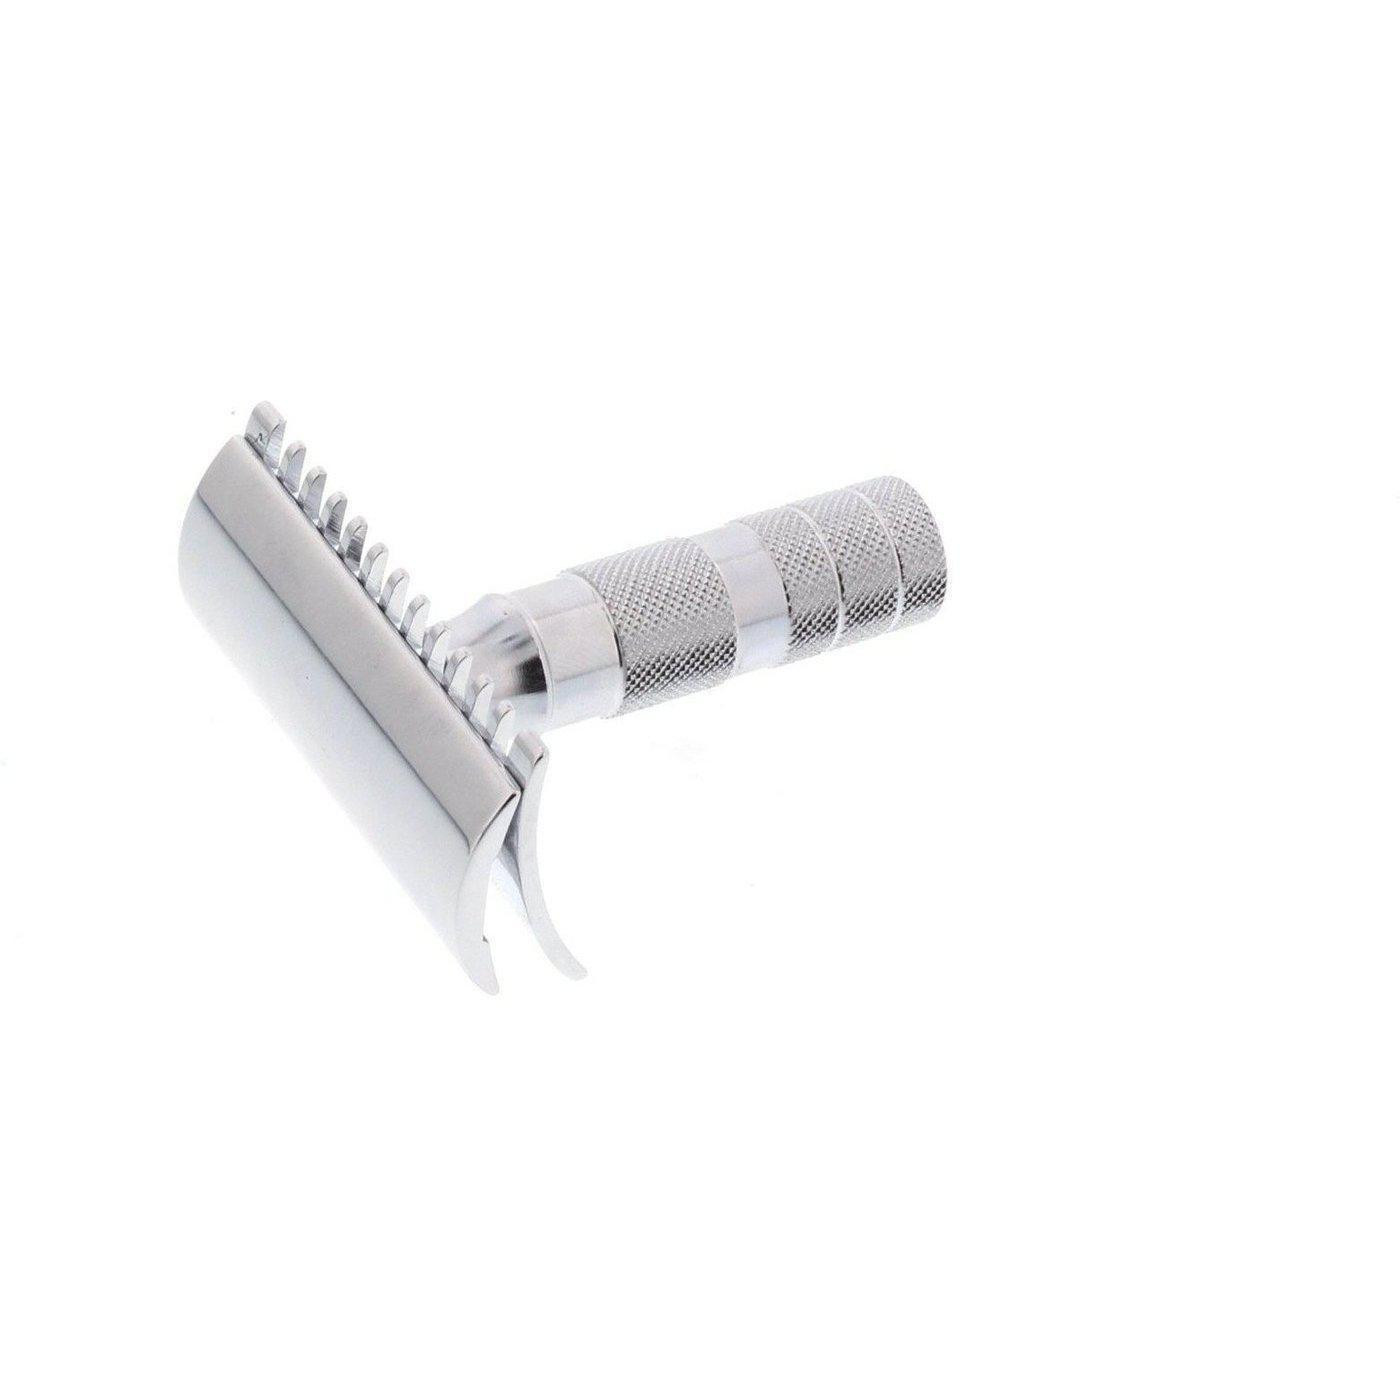 Product image 2 for Merkur Travel Safety Razor, Open Tooth